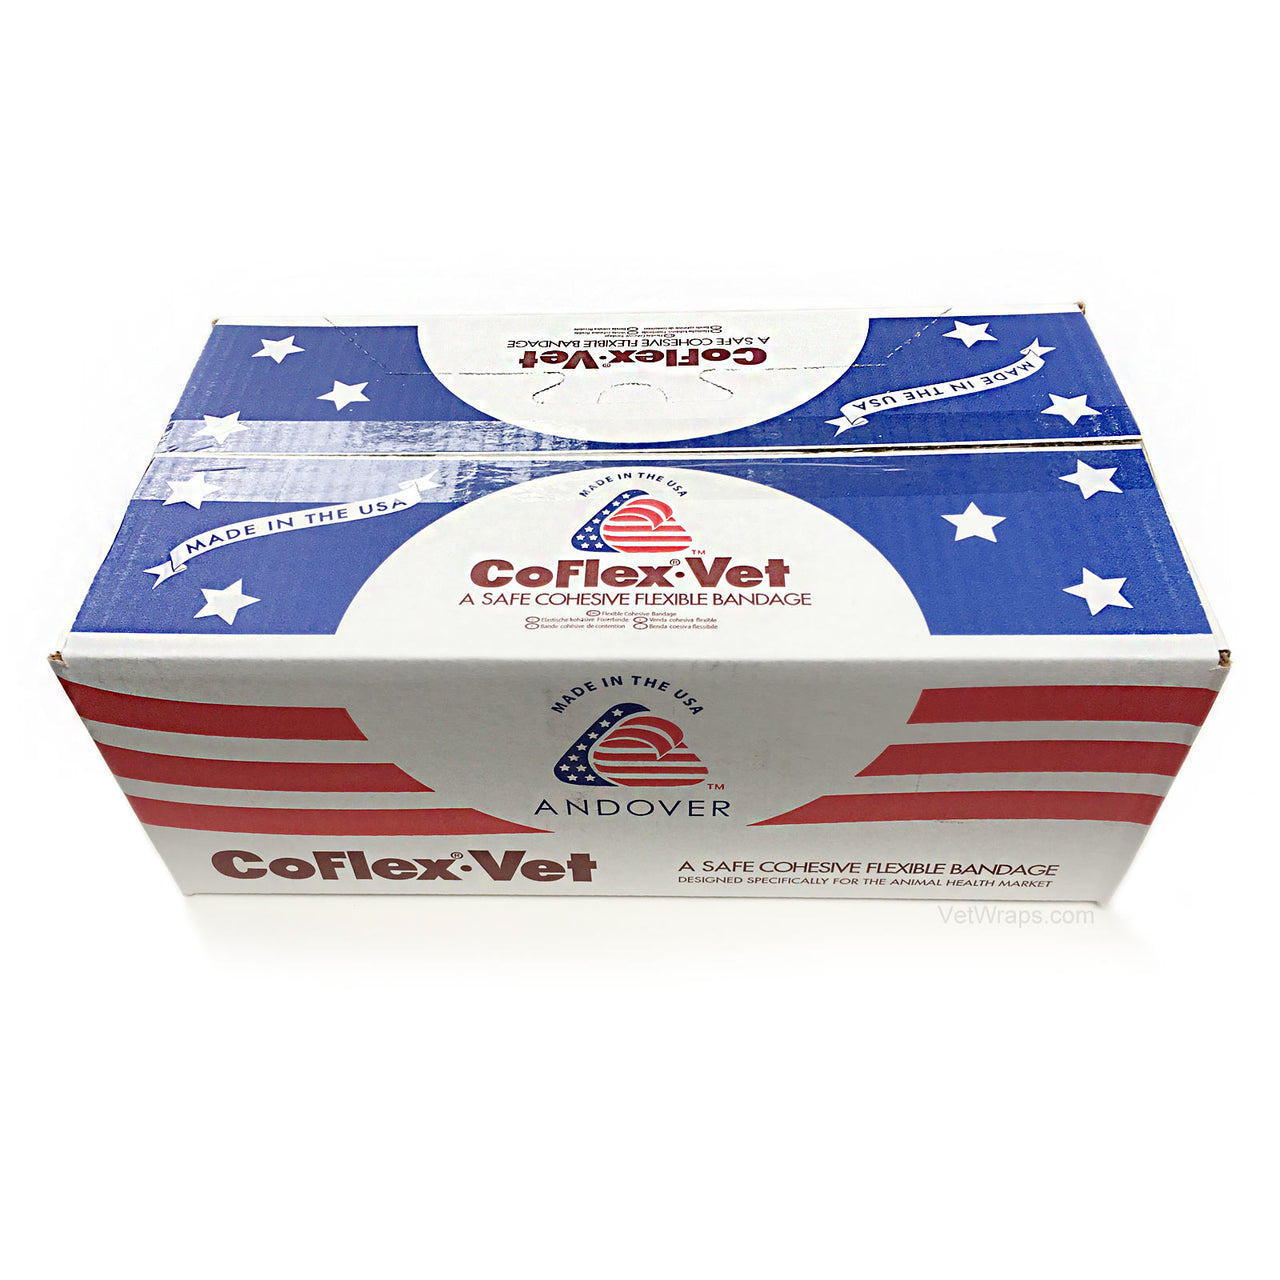 Andover CoFlex Vet Cohesive Bandage Box for 18 Roll Pack